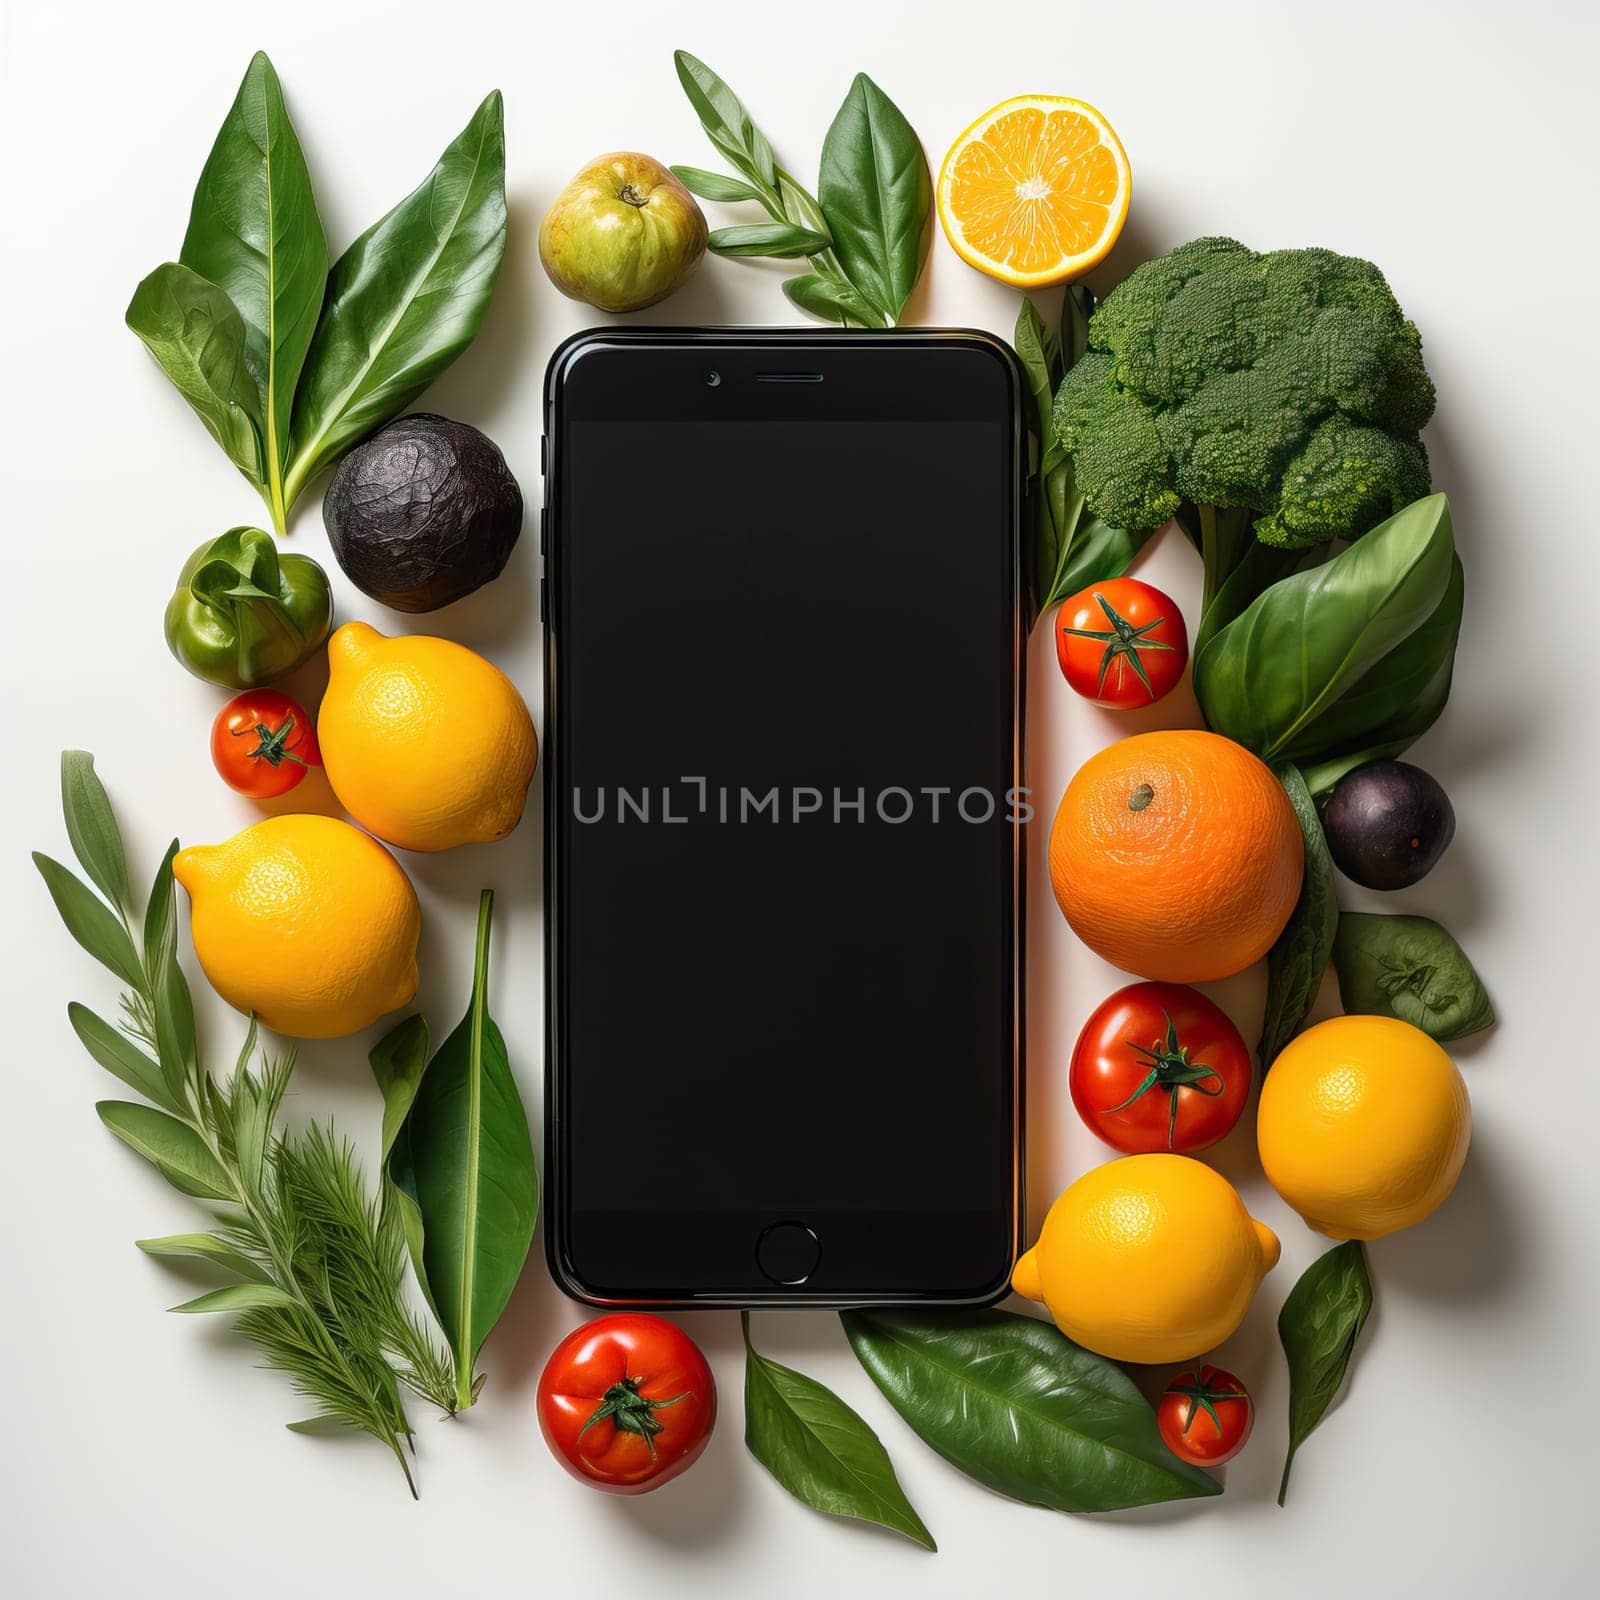 Smartphone with blank screen and fresh food, online food shopping app, fruit diet concept with phone.